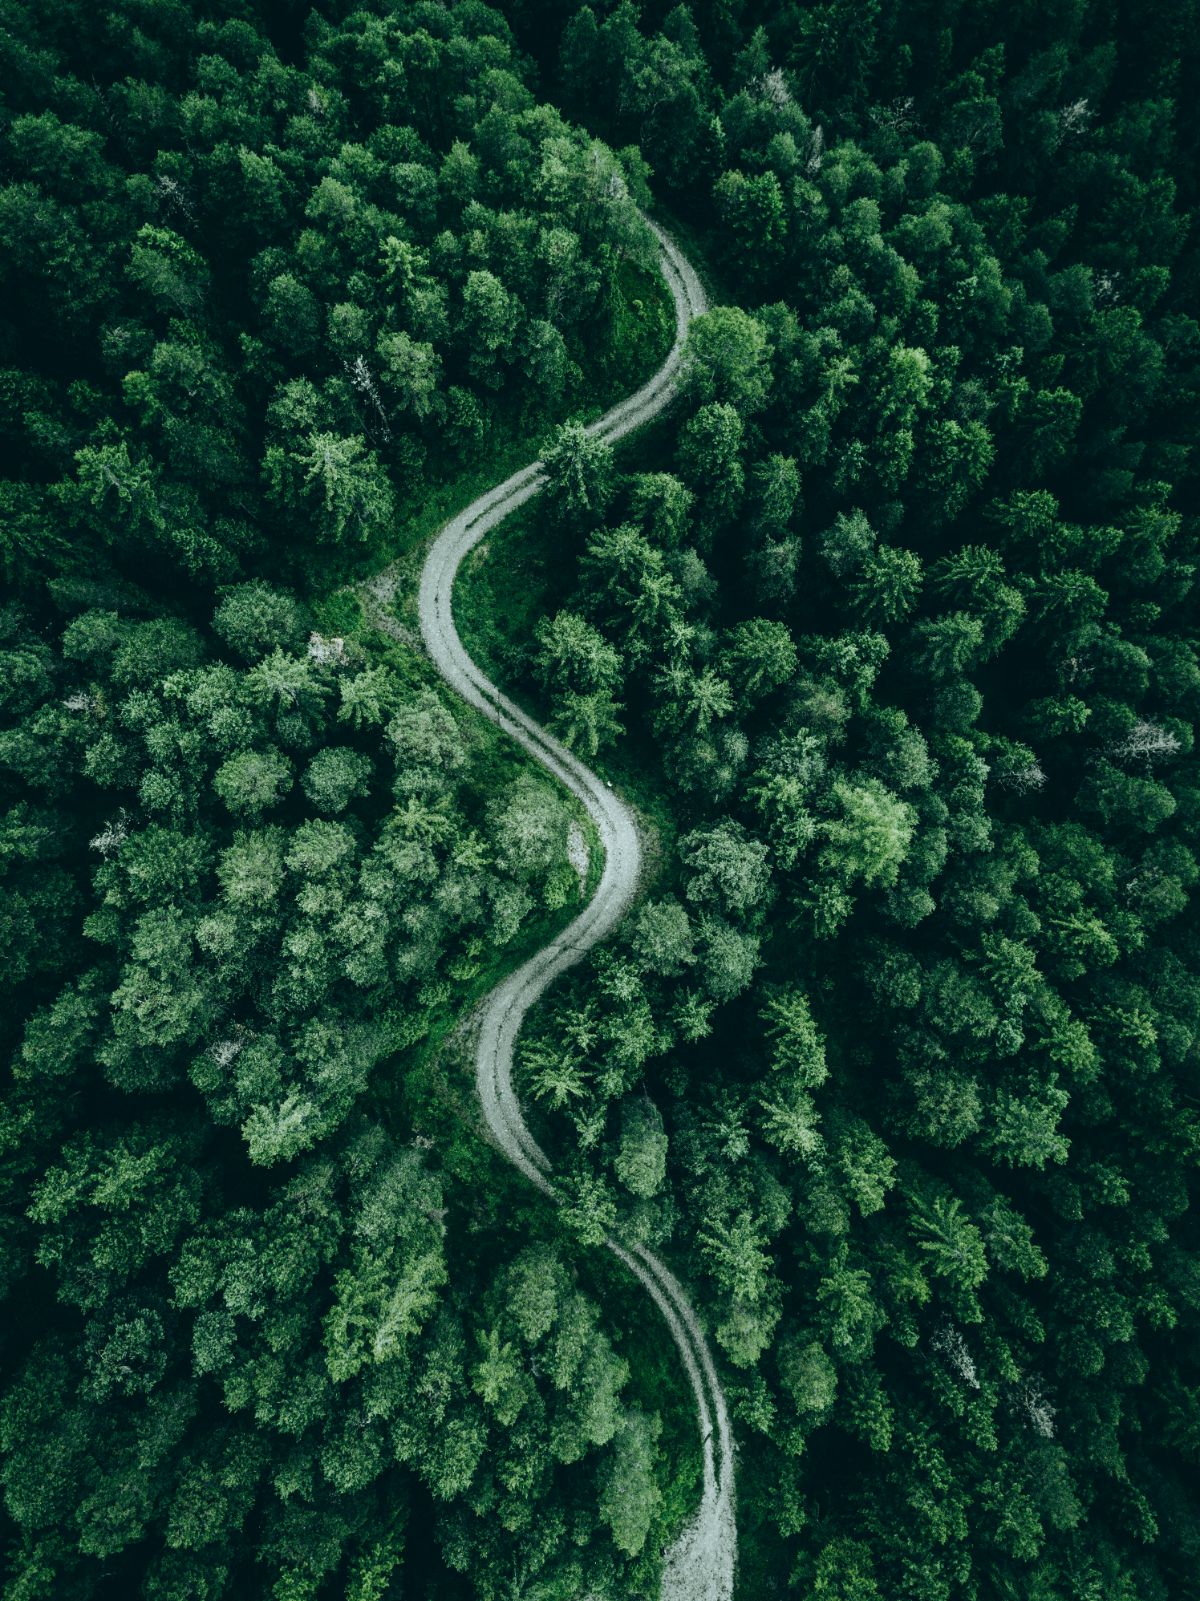 Aerial view of dirt road winding through forest 9.